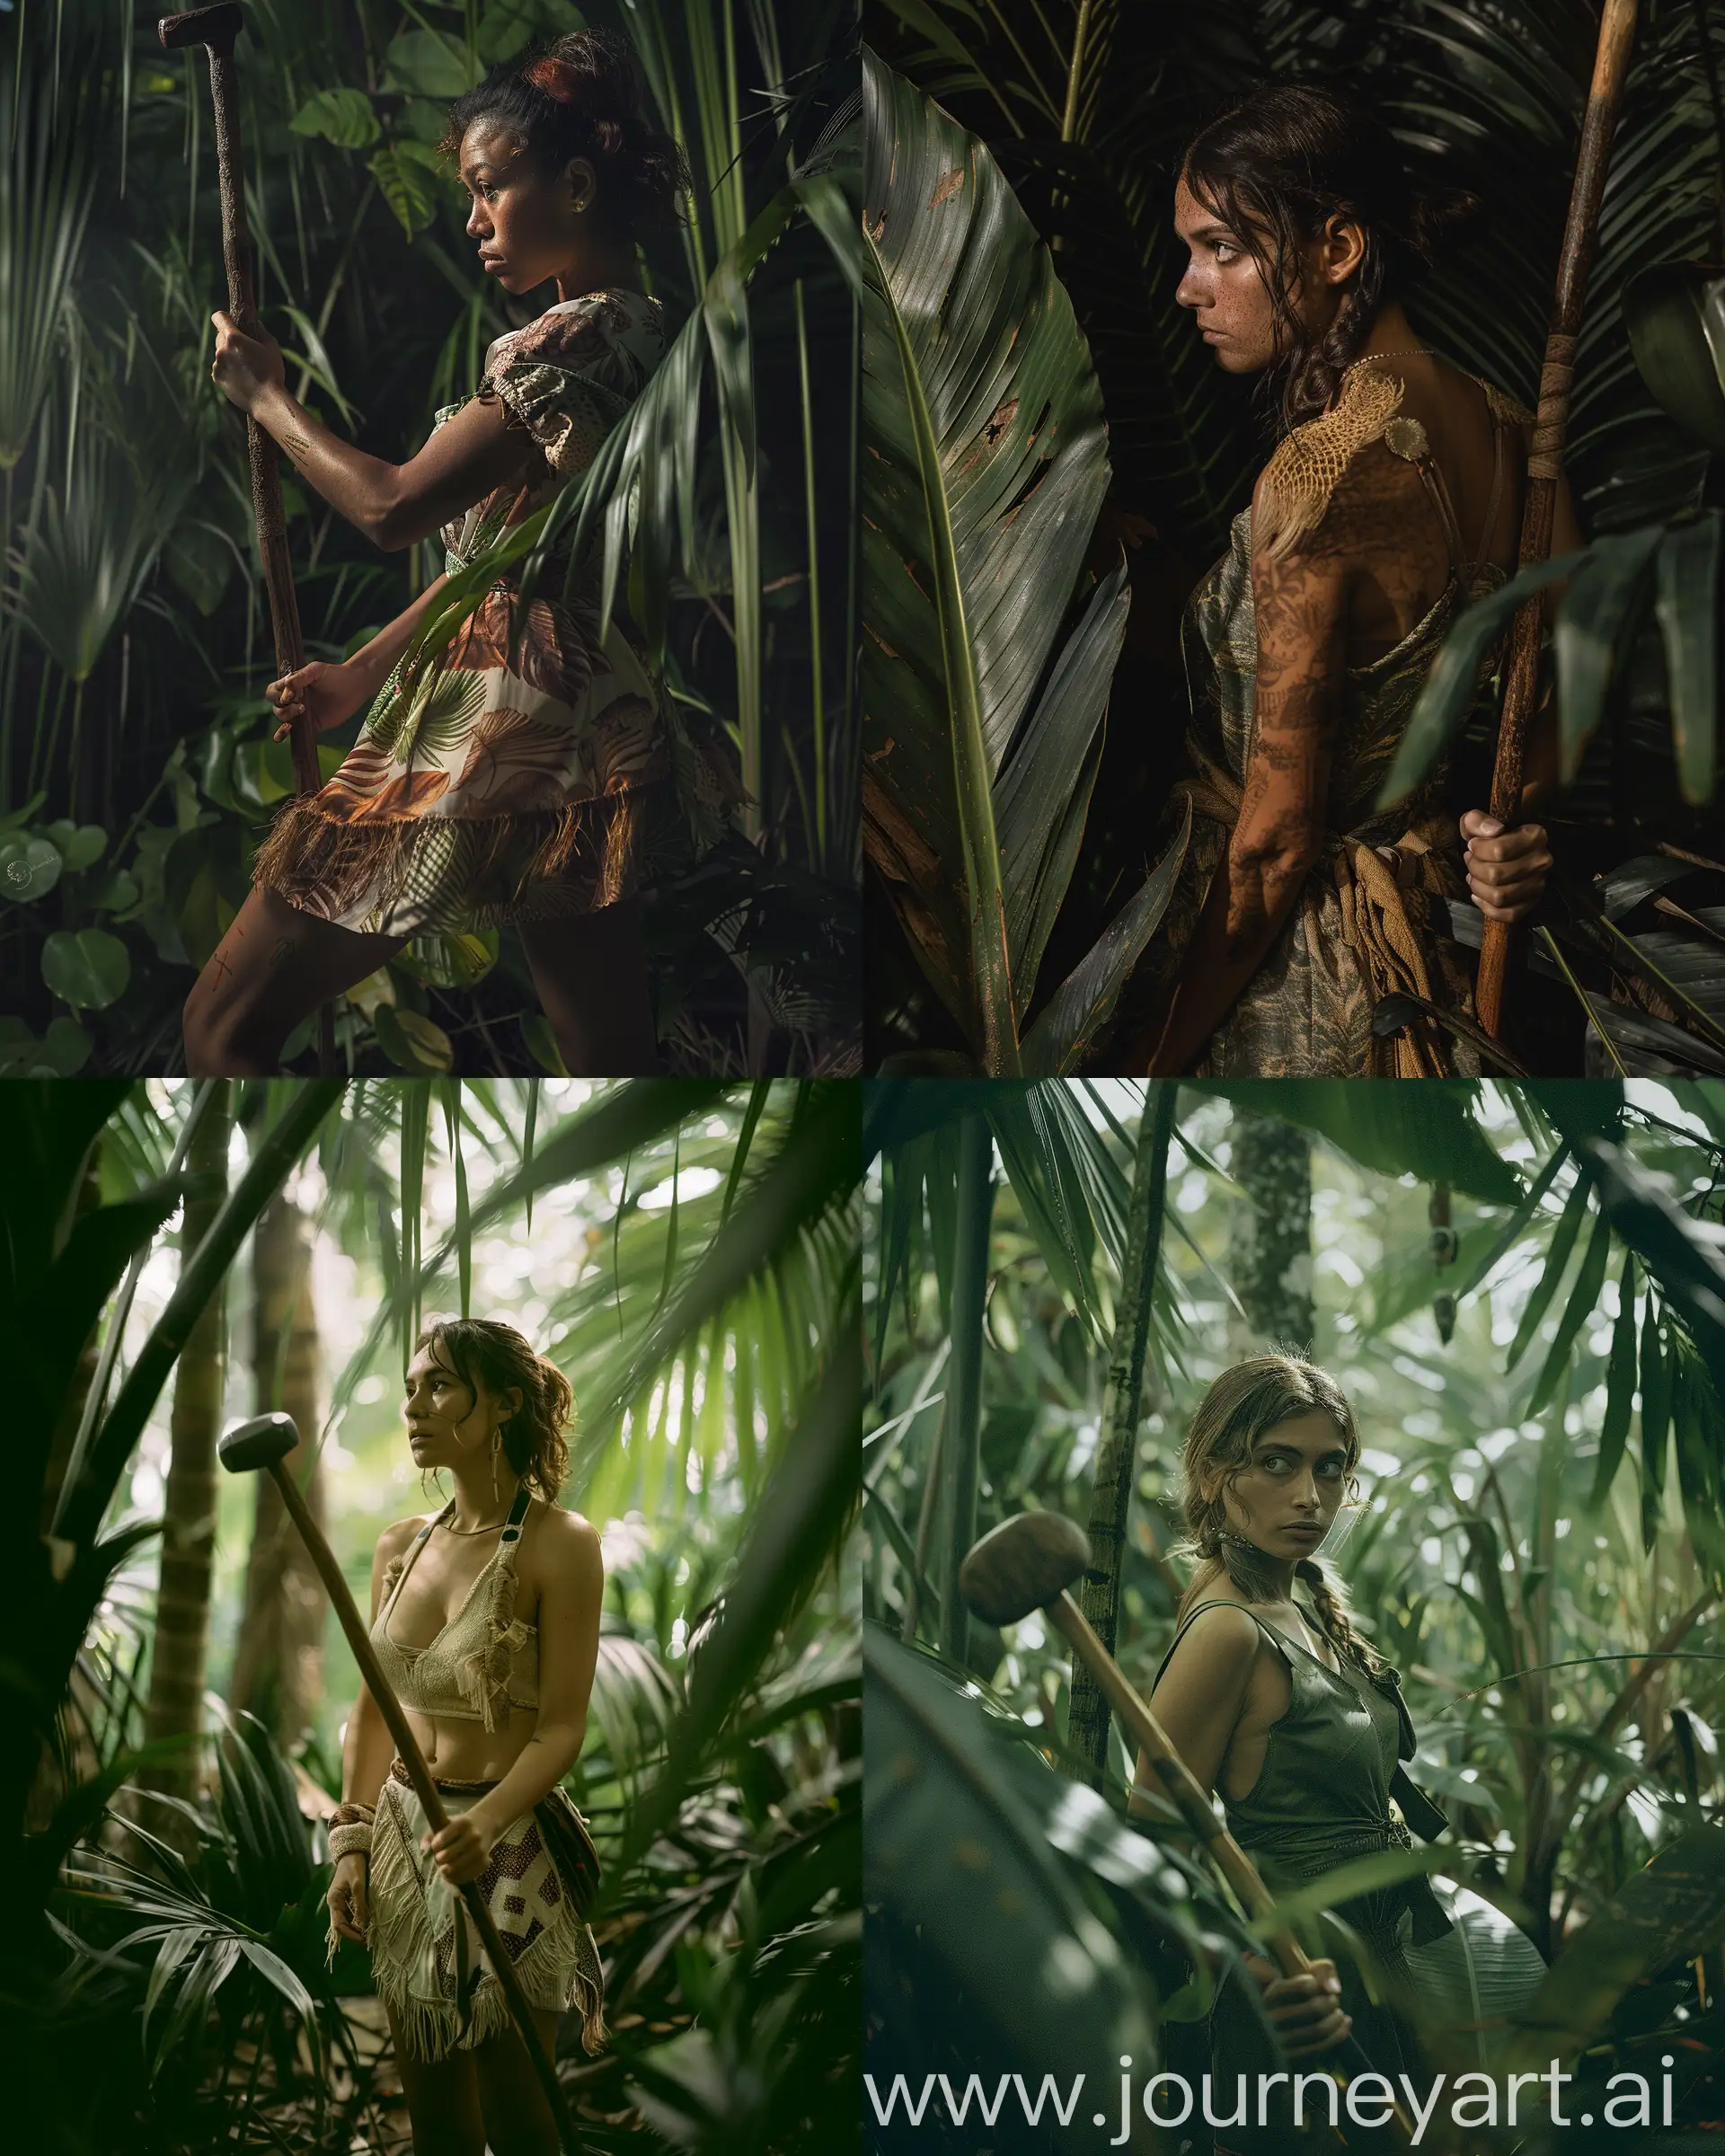 Prehistoric-Woman-with-Club-in-Tropical-Rainforest-Fujifilm-GFX-50S-Photography